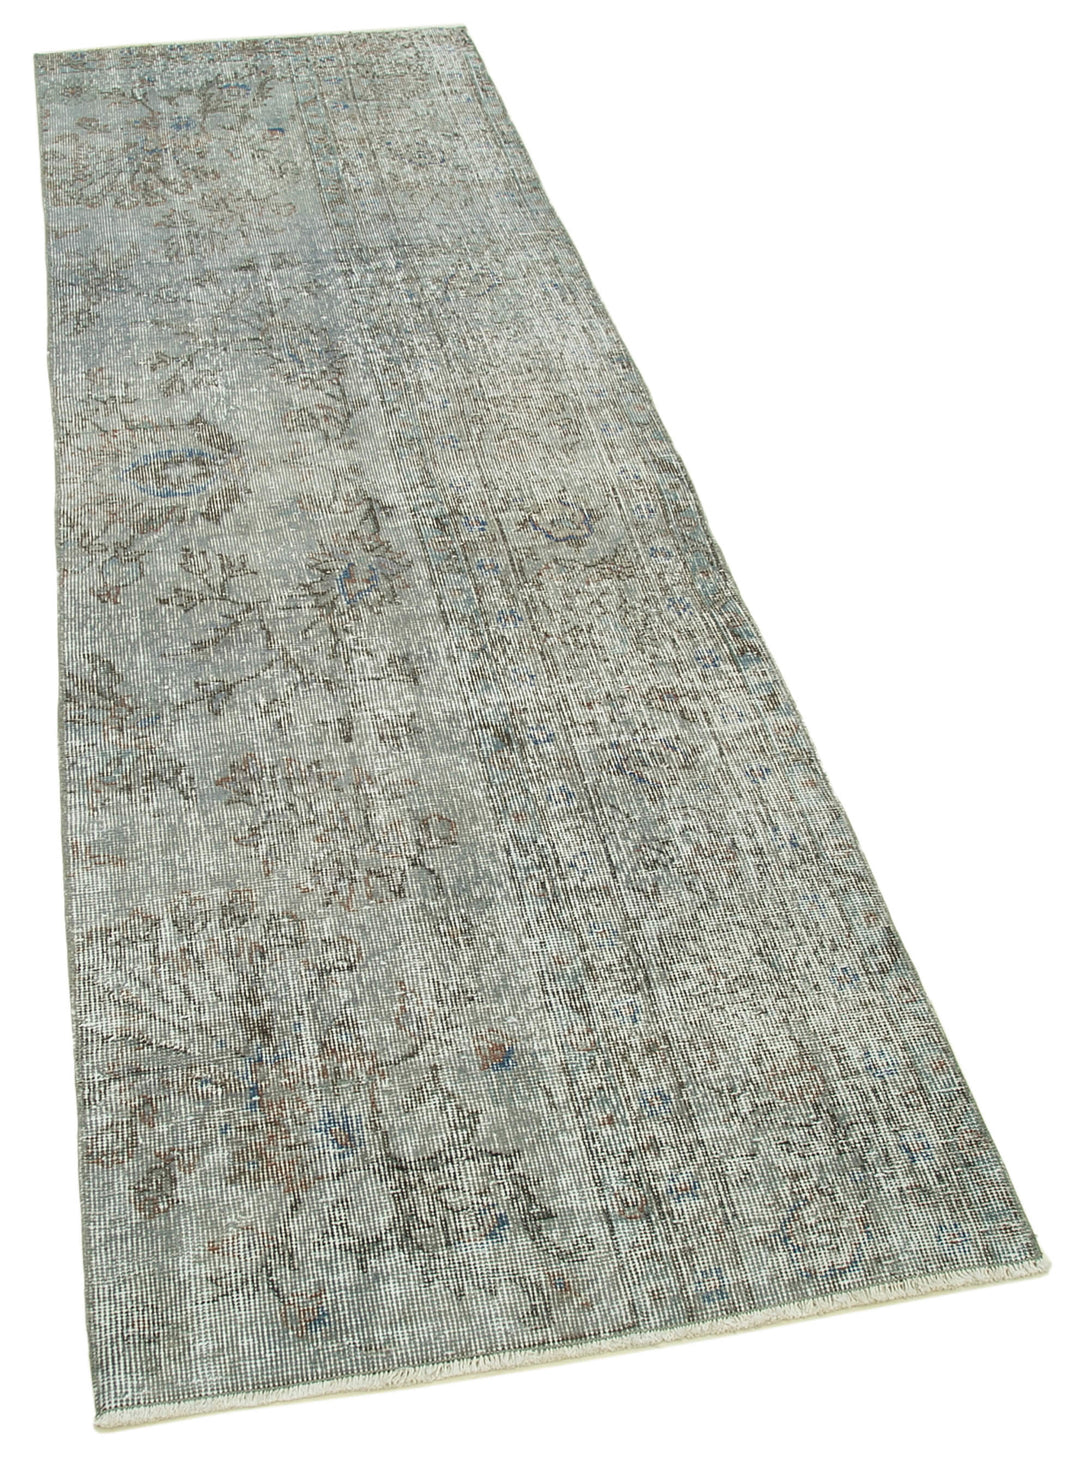 Handmade Overdyed Runner > Design# OL-AC-37058 > Size: 2'-7" x 8'-1", Carpet Culture Rugs, Handmade Rugs, NYC Rugs, New Rugs, Shop Rugs, Rug Store, Outlet Rugs, SoHo Rugs, Rugs in USA